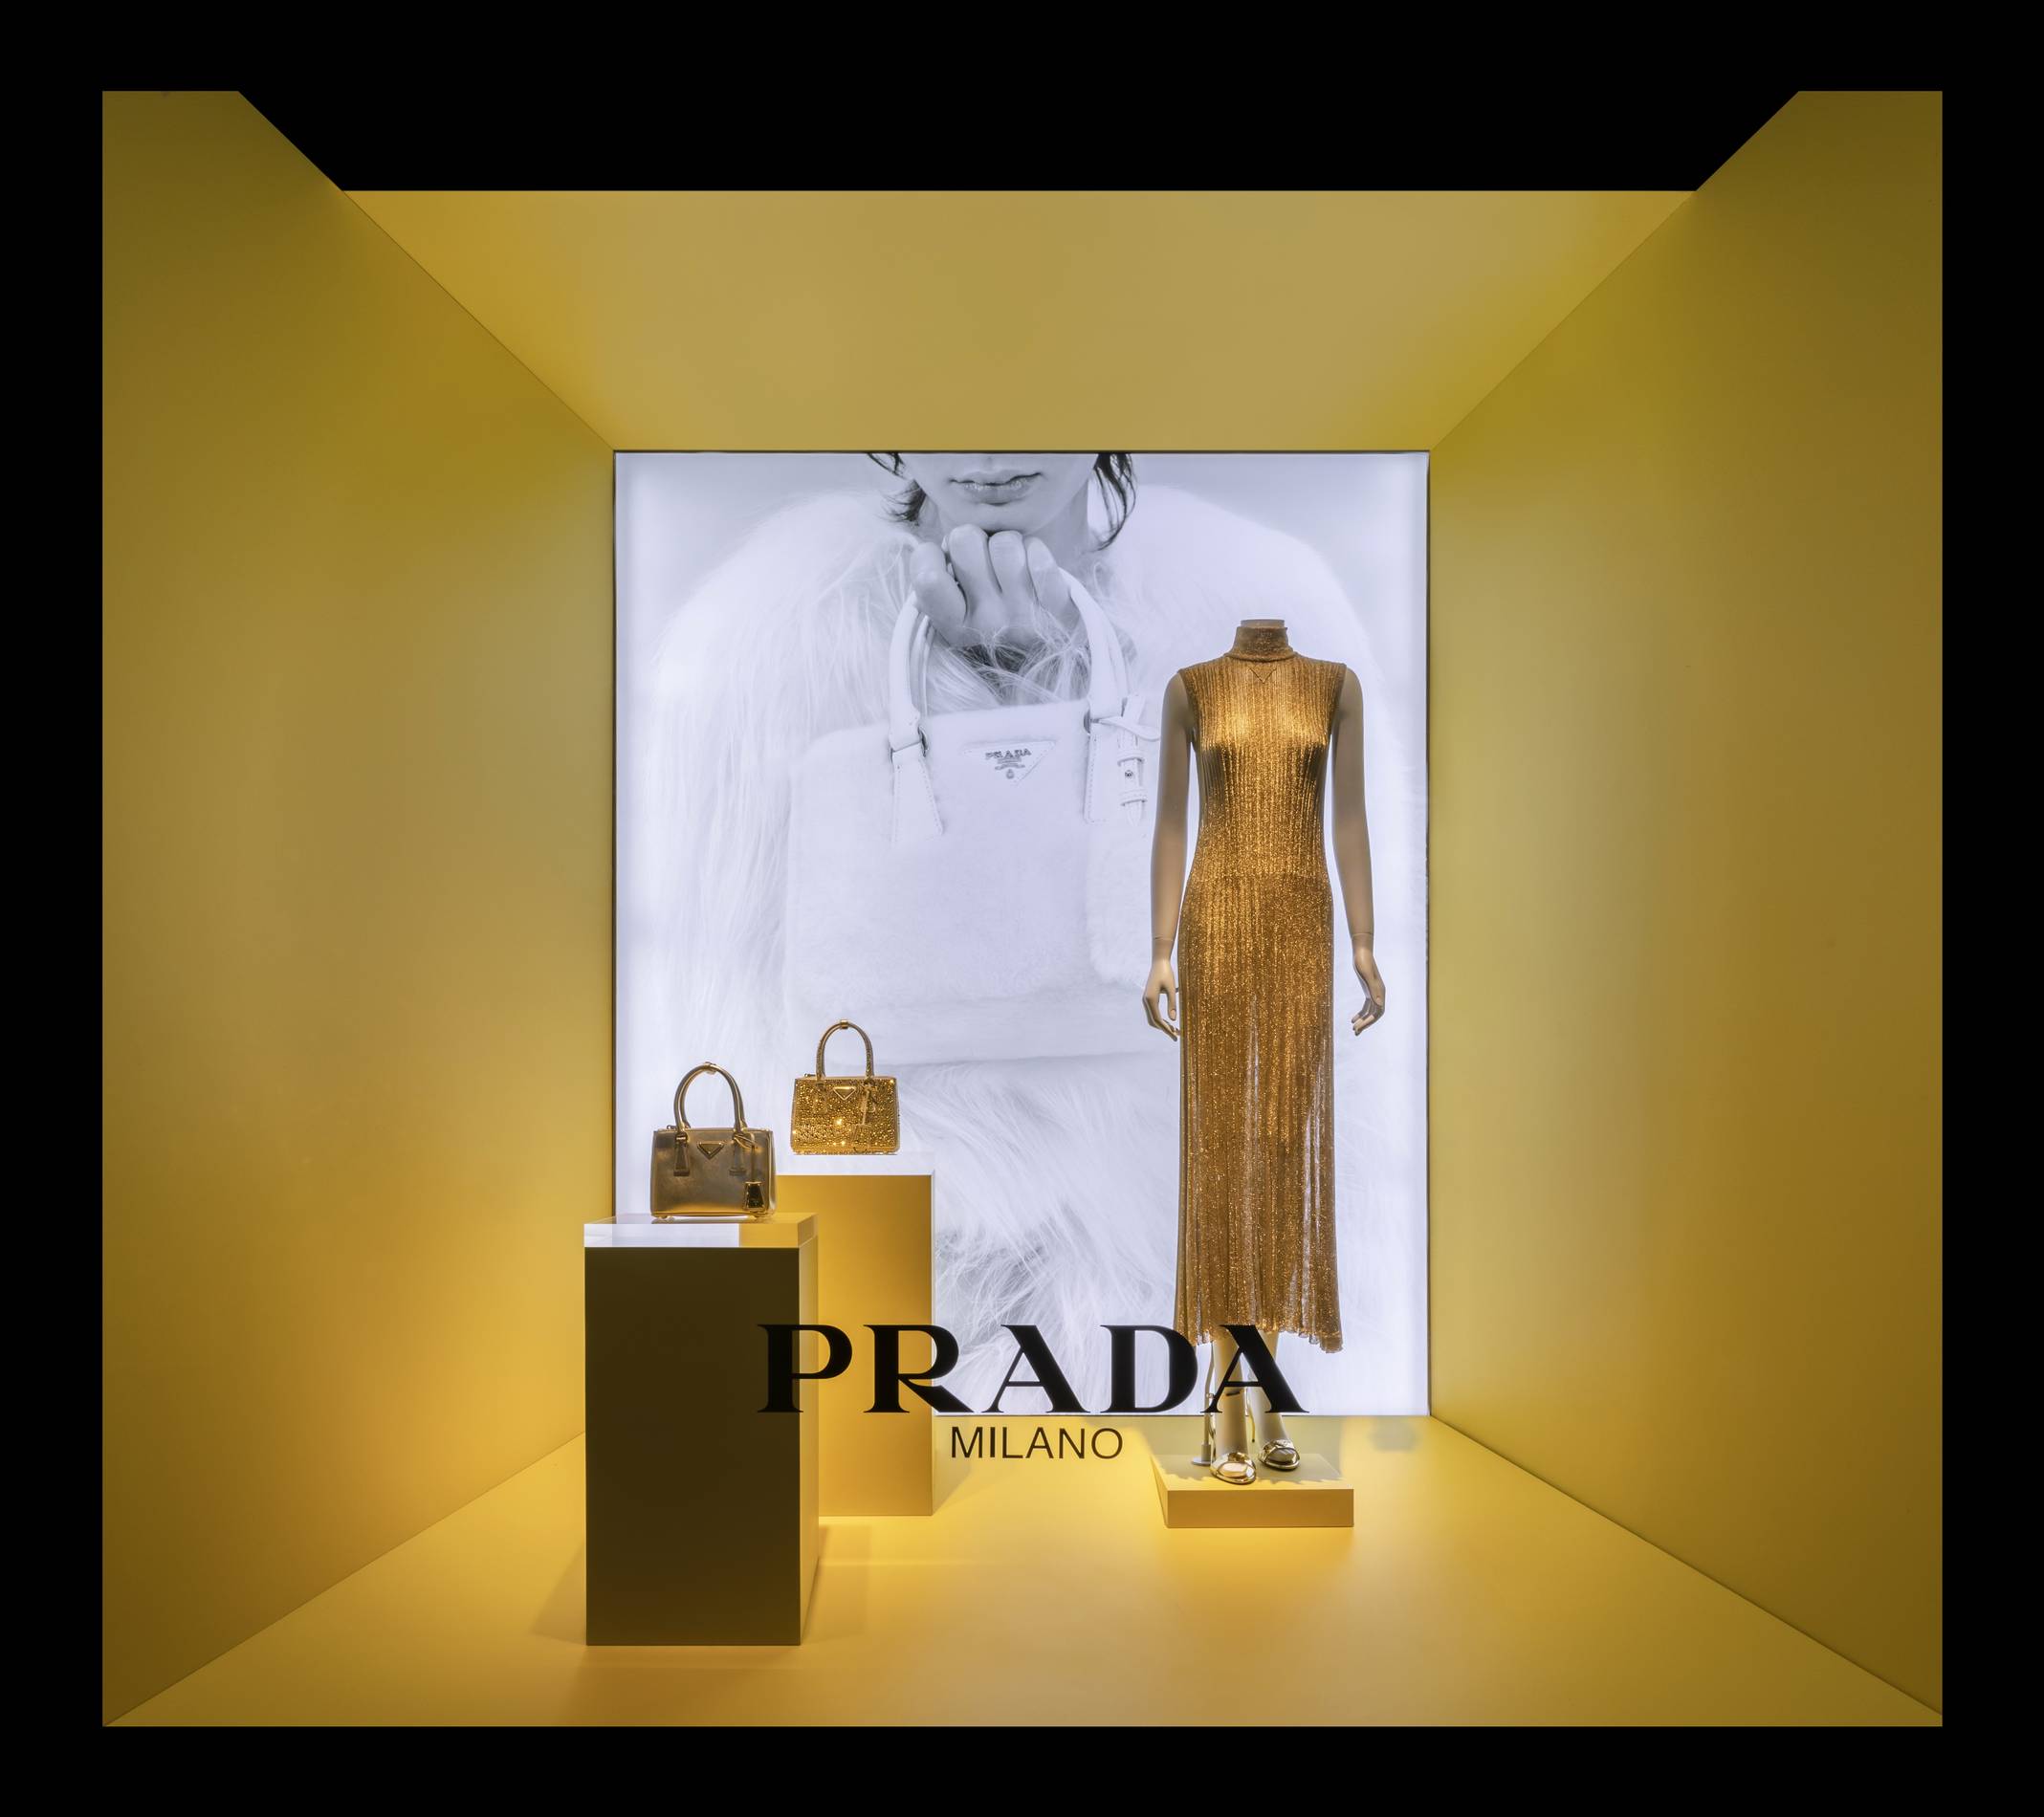 prada's holiday collection window display at saks fifth ave in nyc